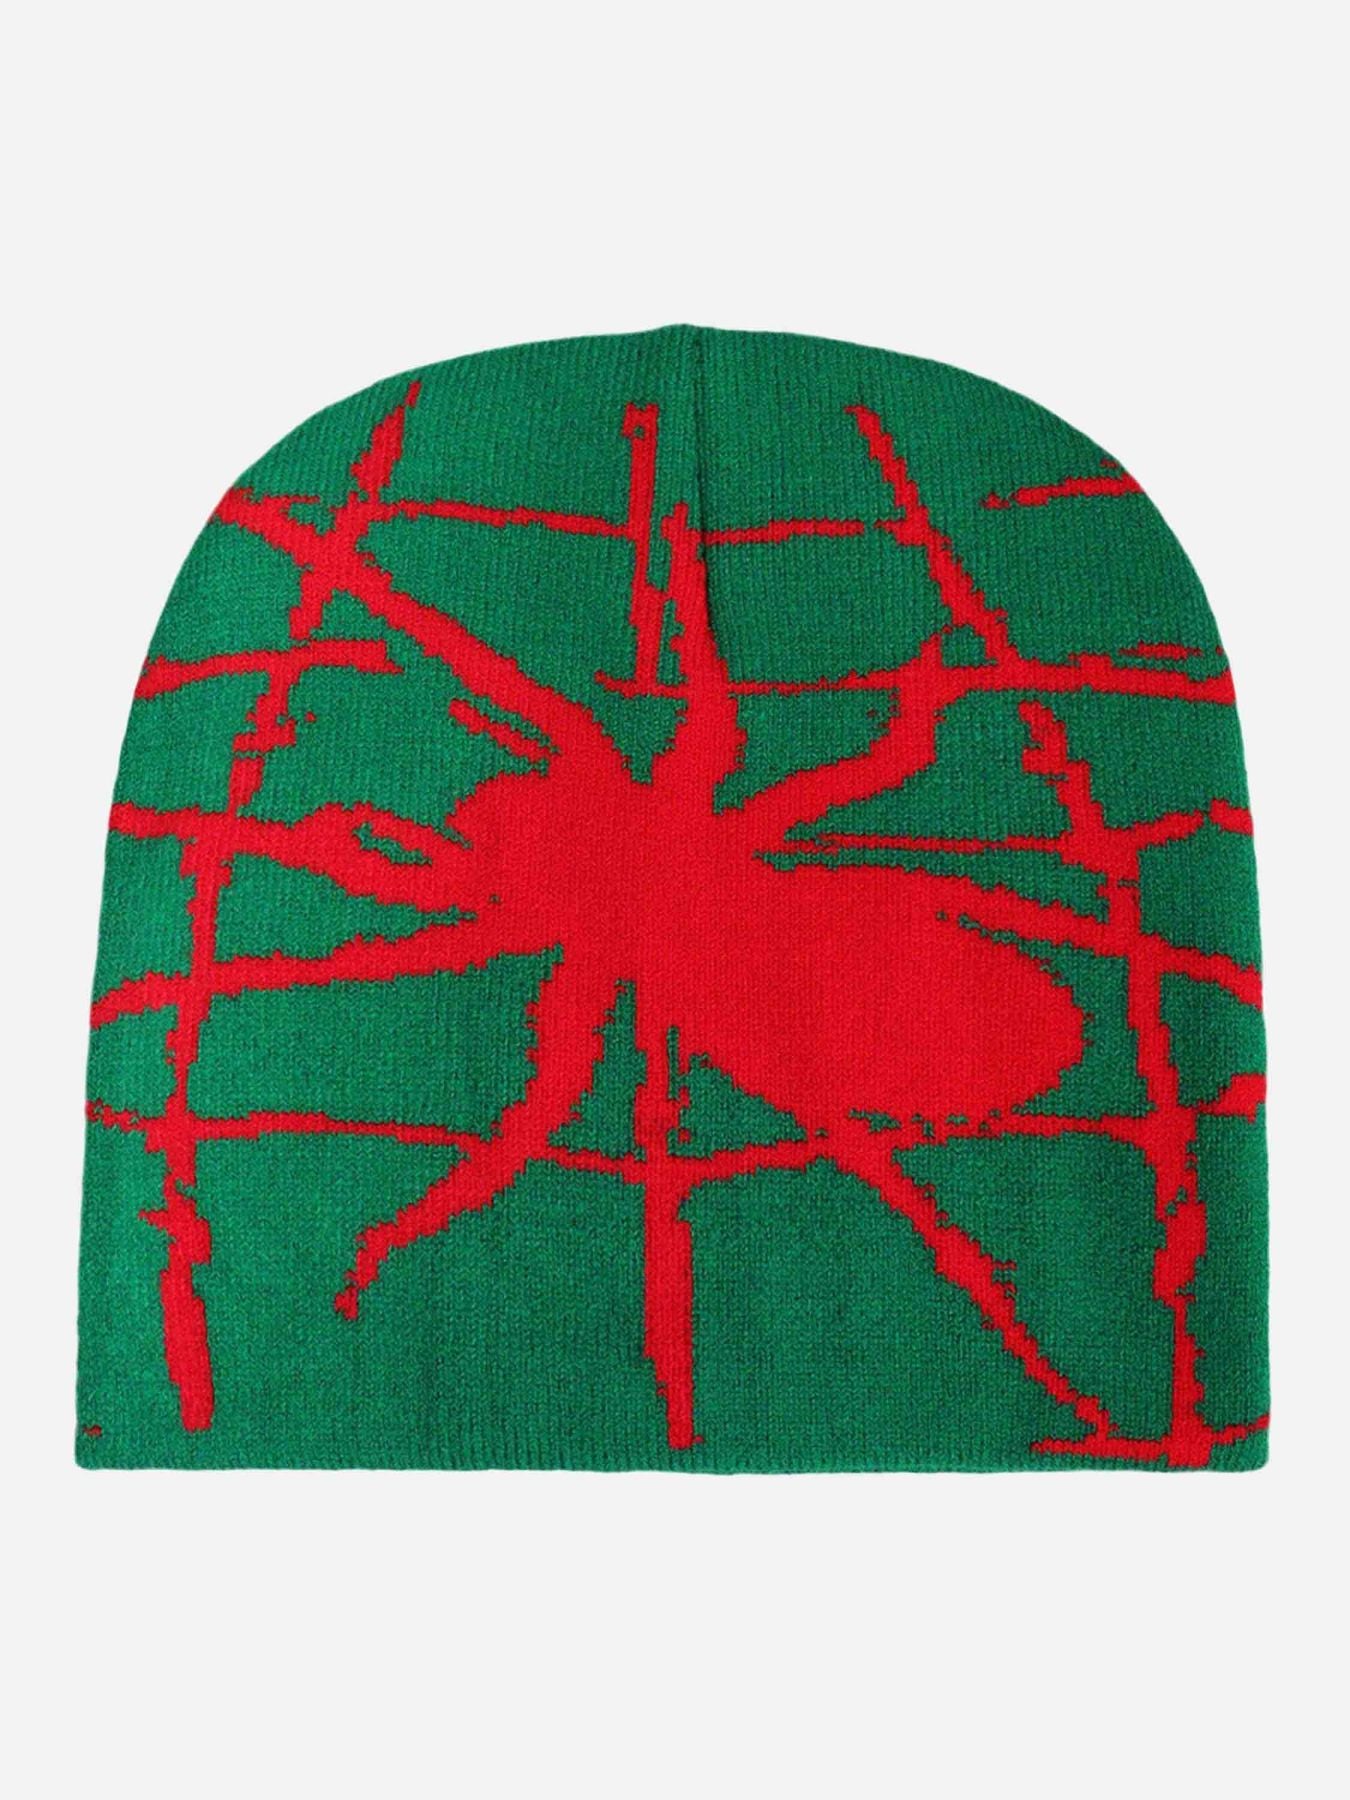 Thesupermade Cobweb Knitted Hat - 1989